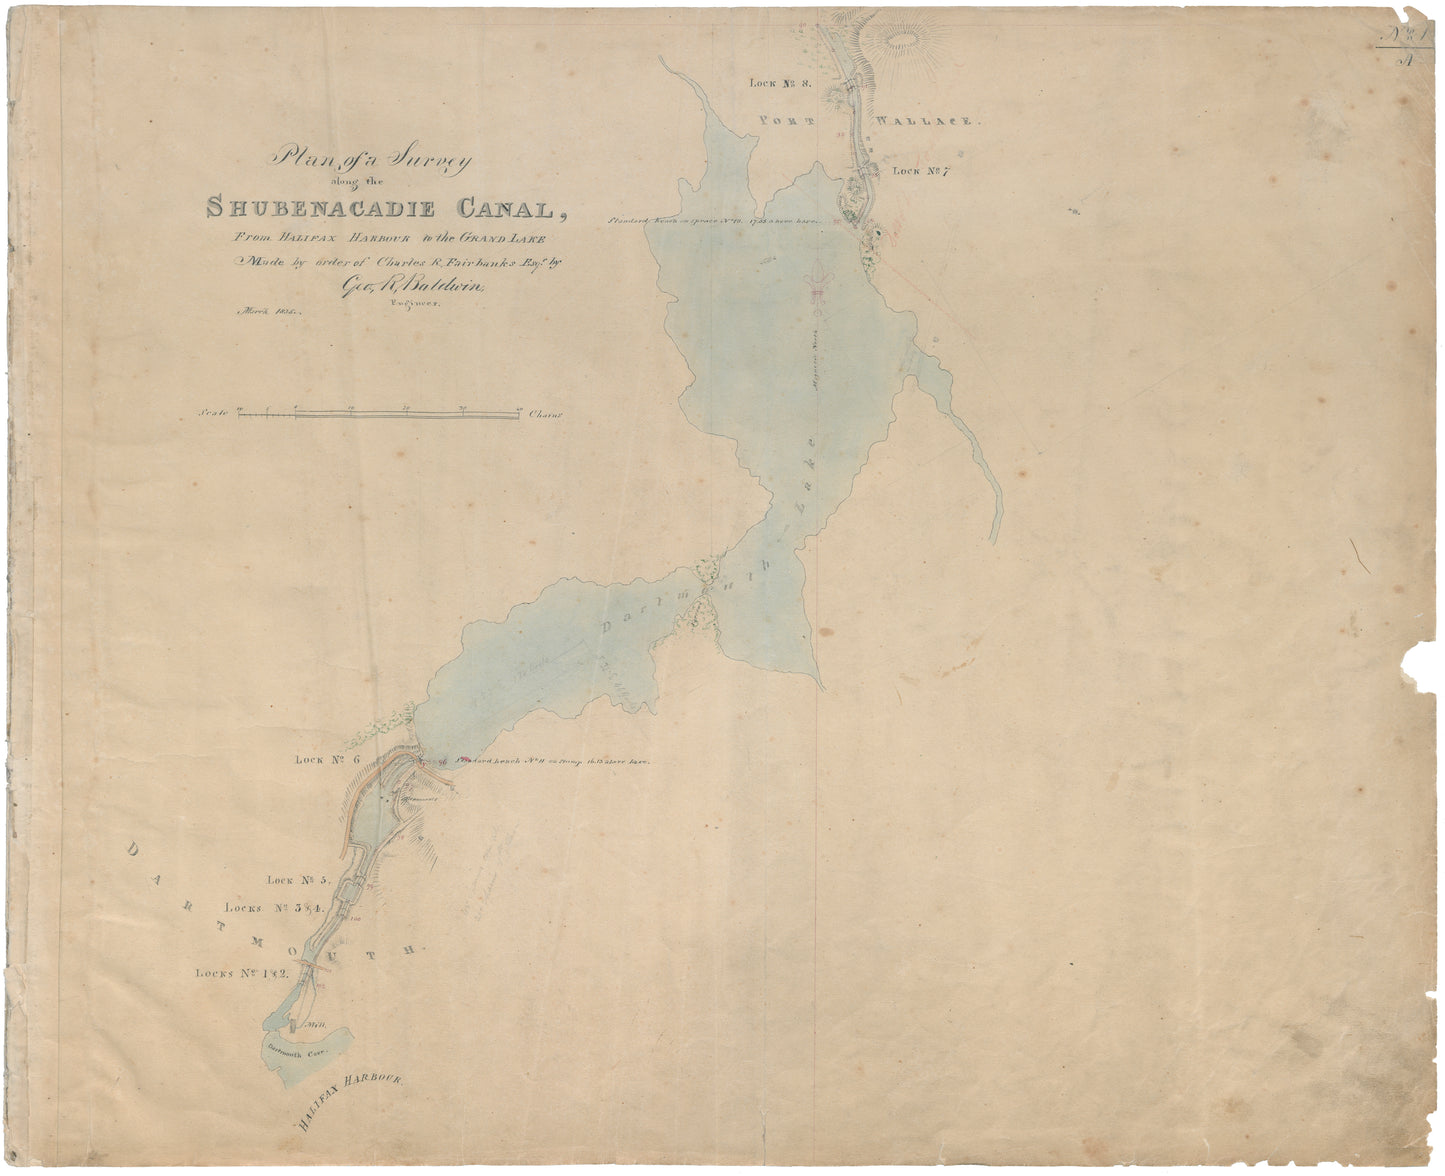 Plan of a Survey along the Shubenacadie Canal, From Halifax Harbour to the Grand Lake